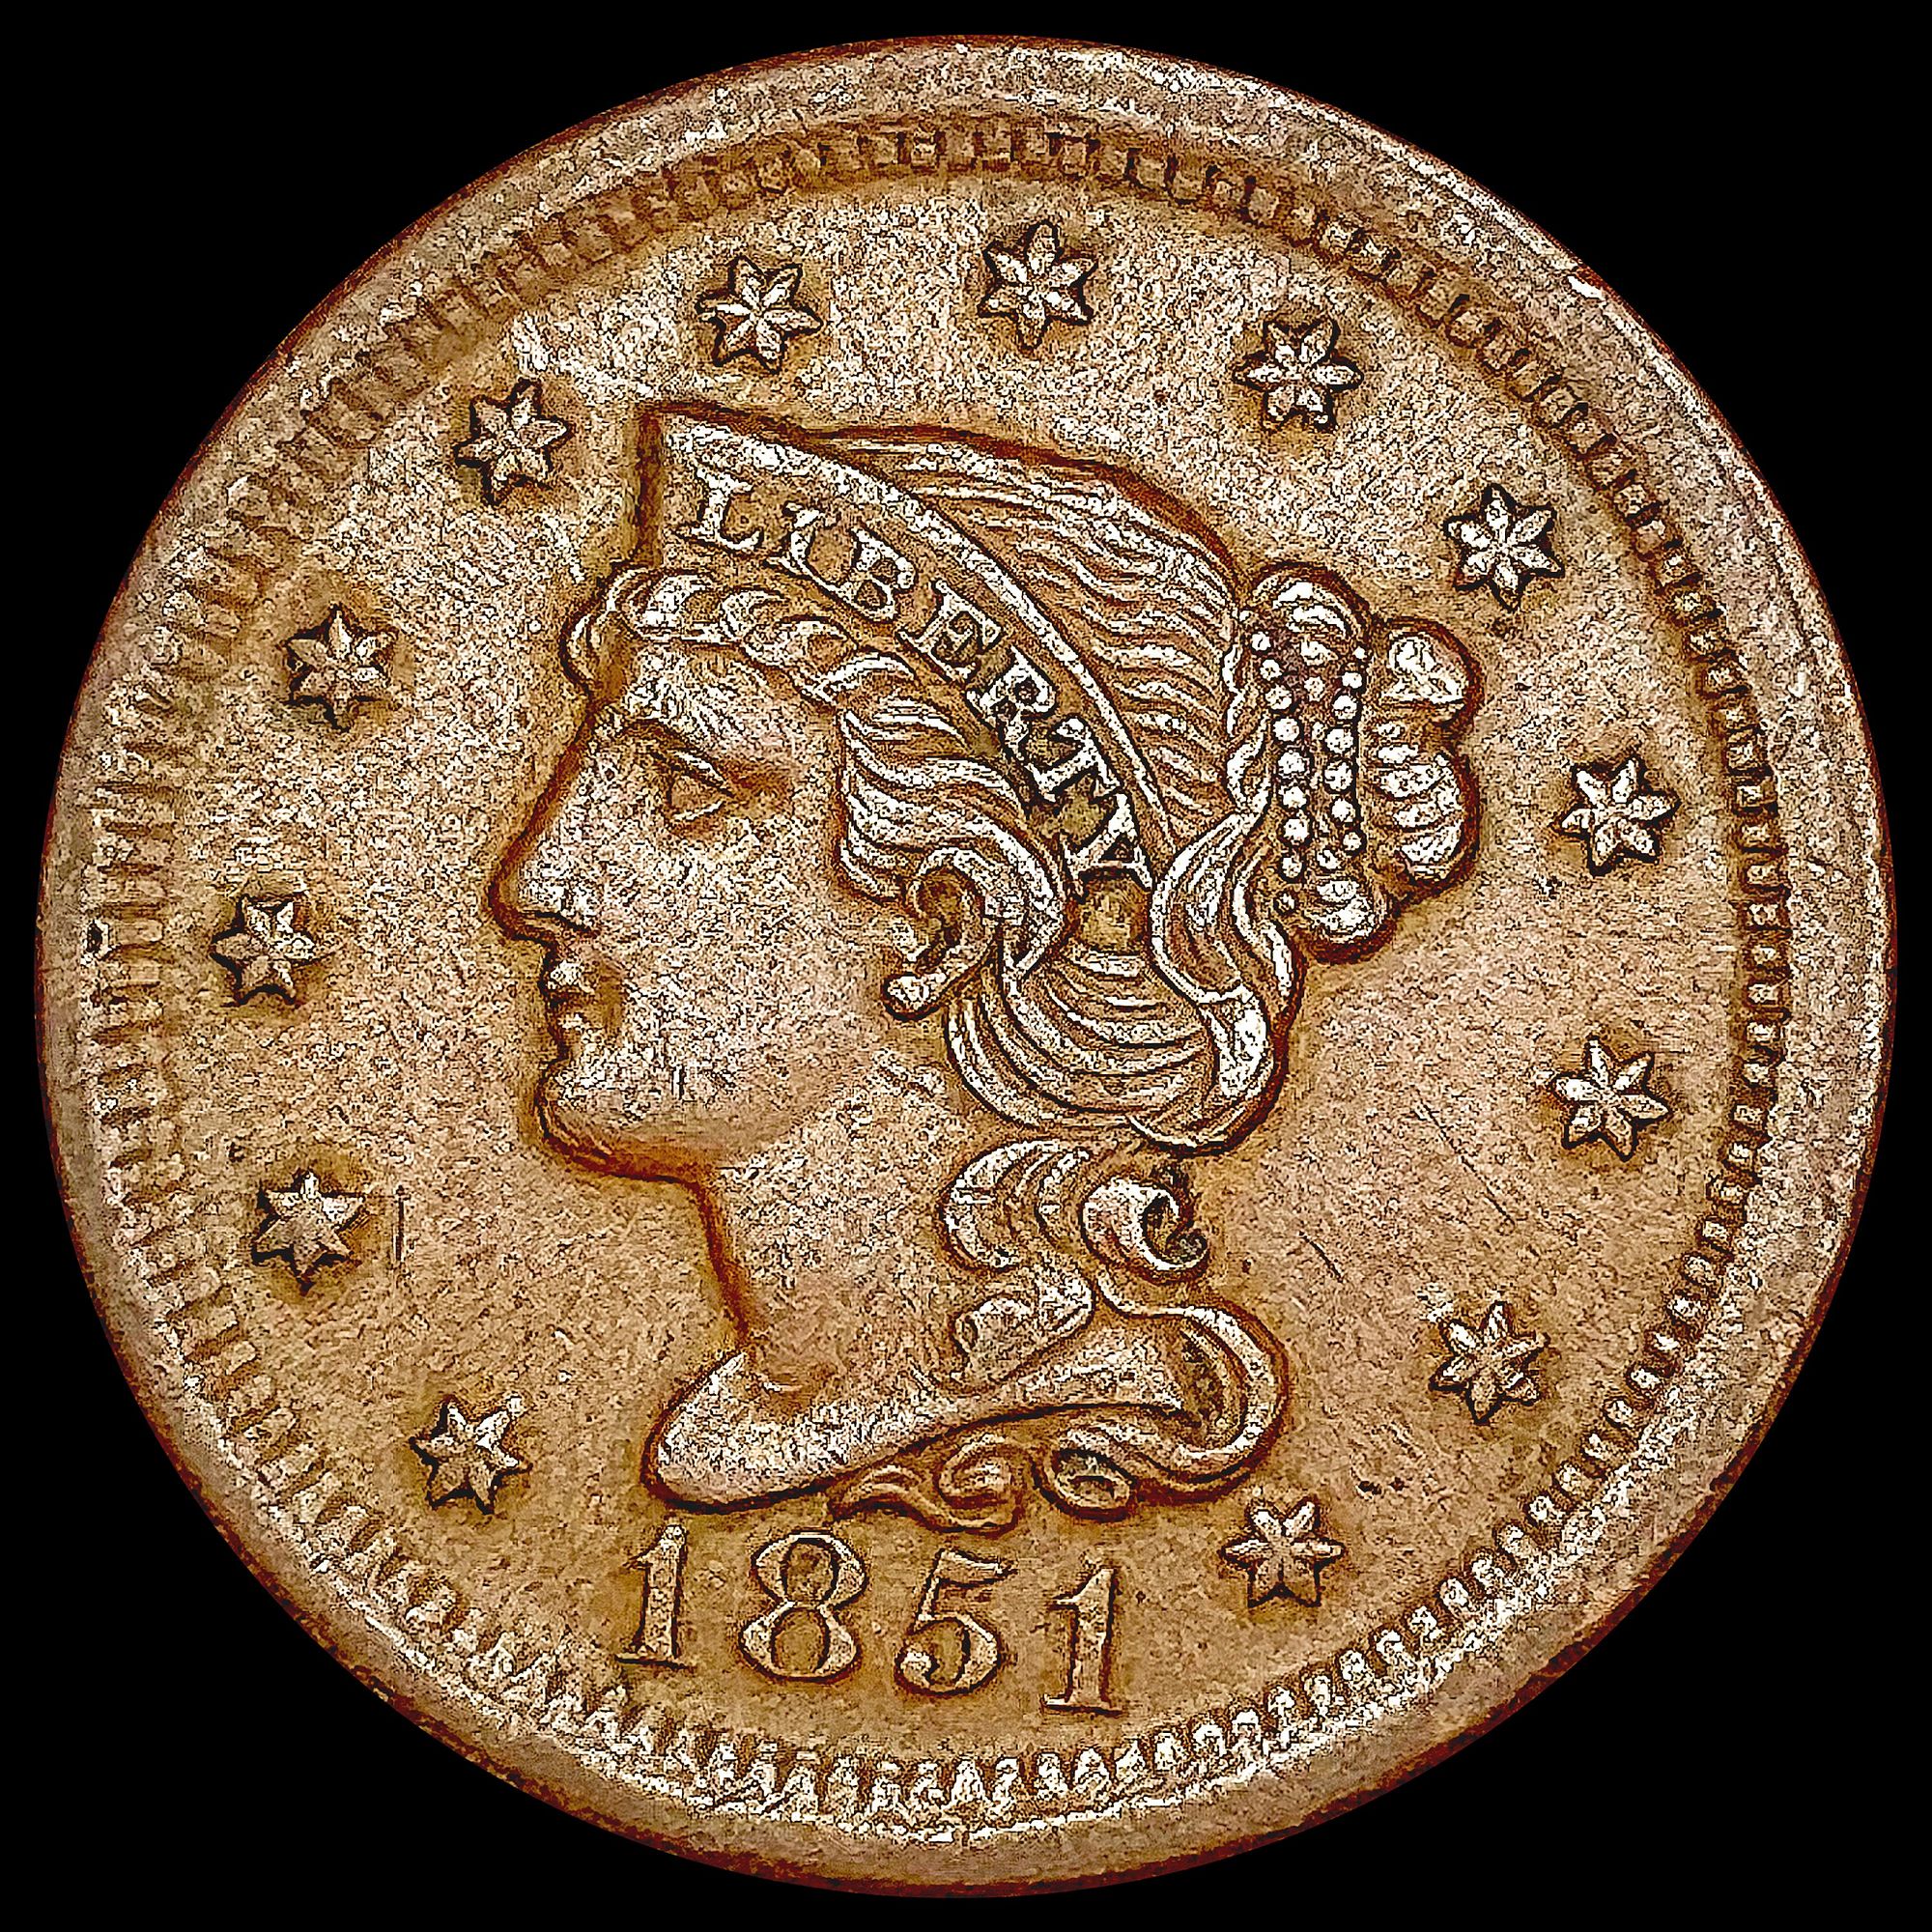 1851 Braided Hair Large Cent CLOSELY UNCIRCULATED for sale at auction on  21st January